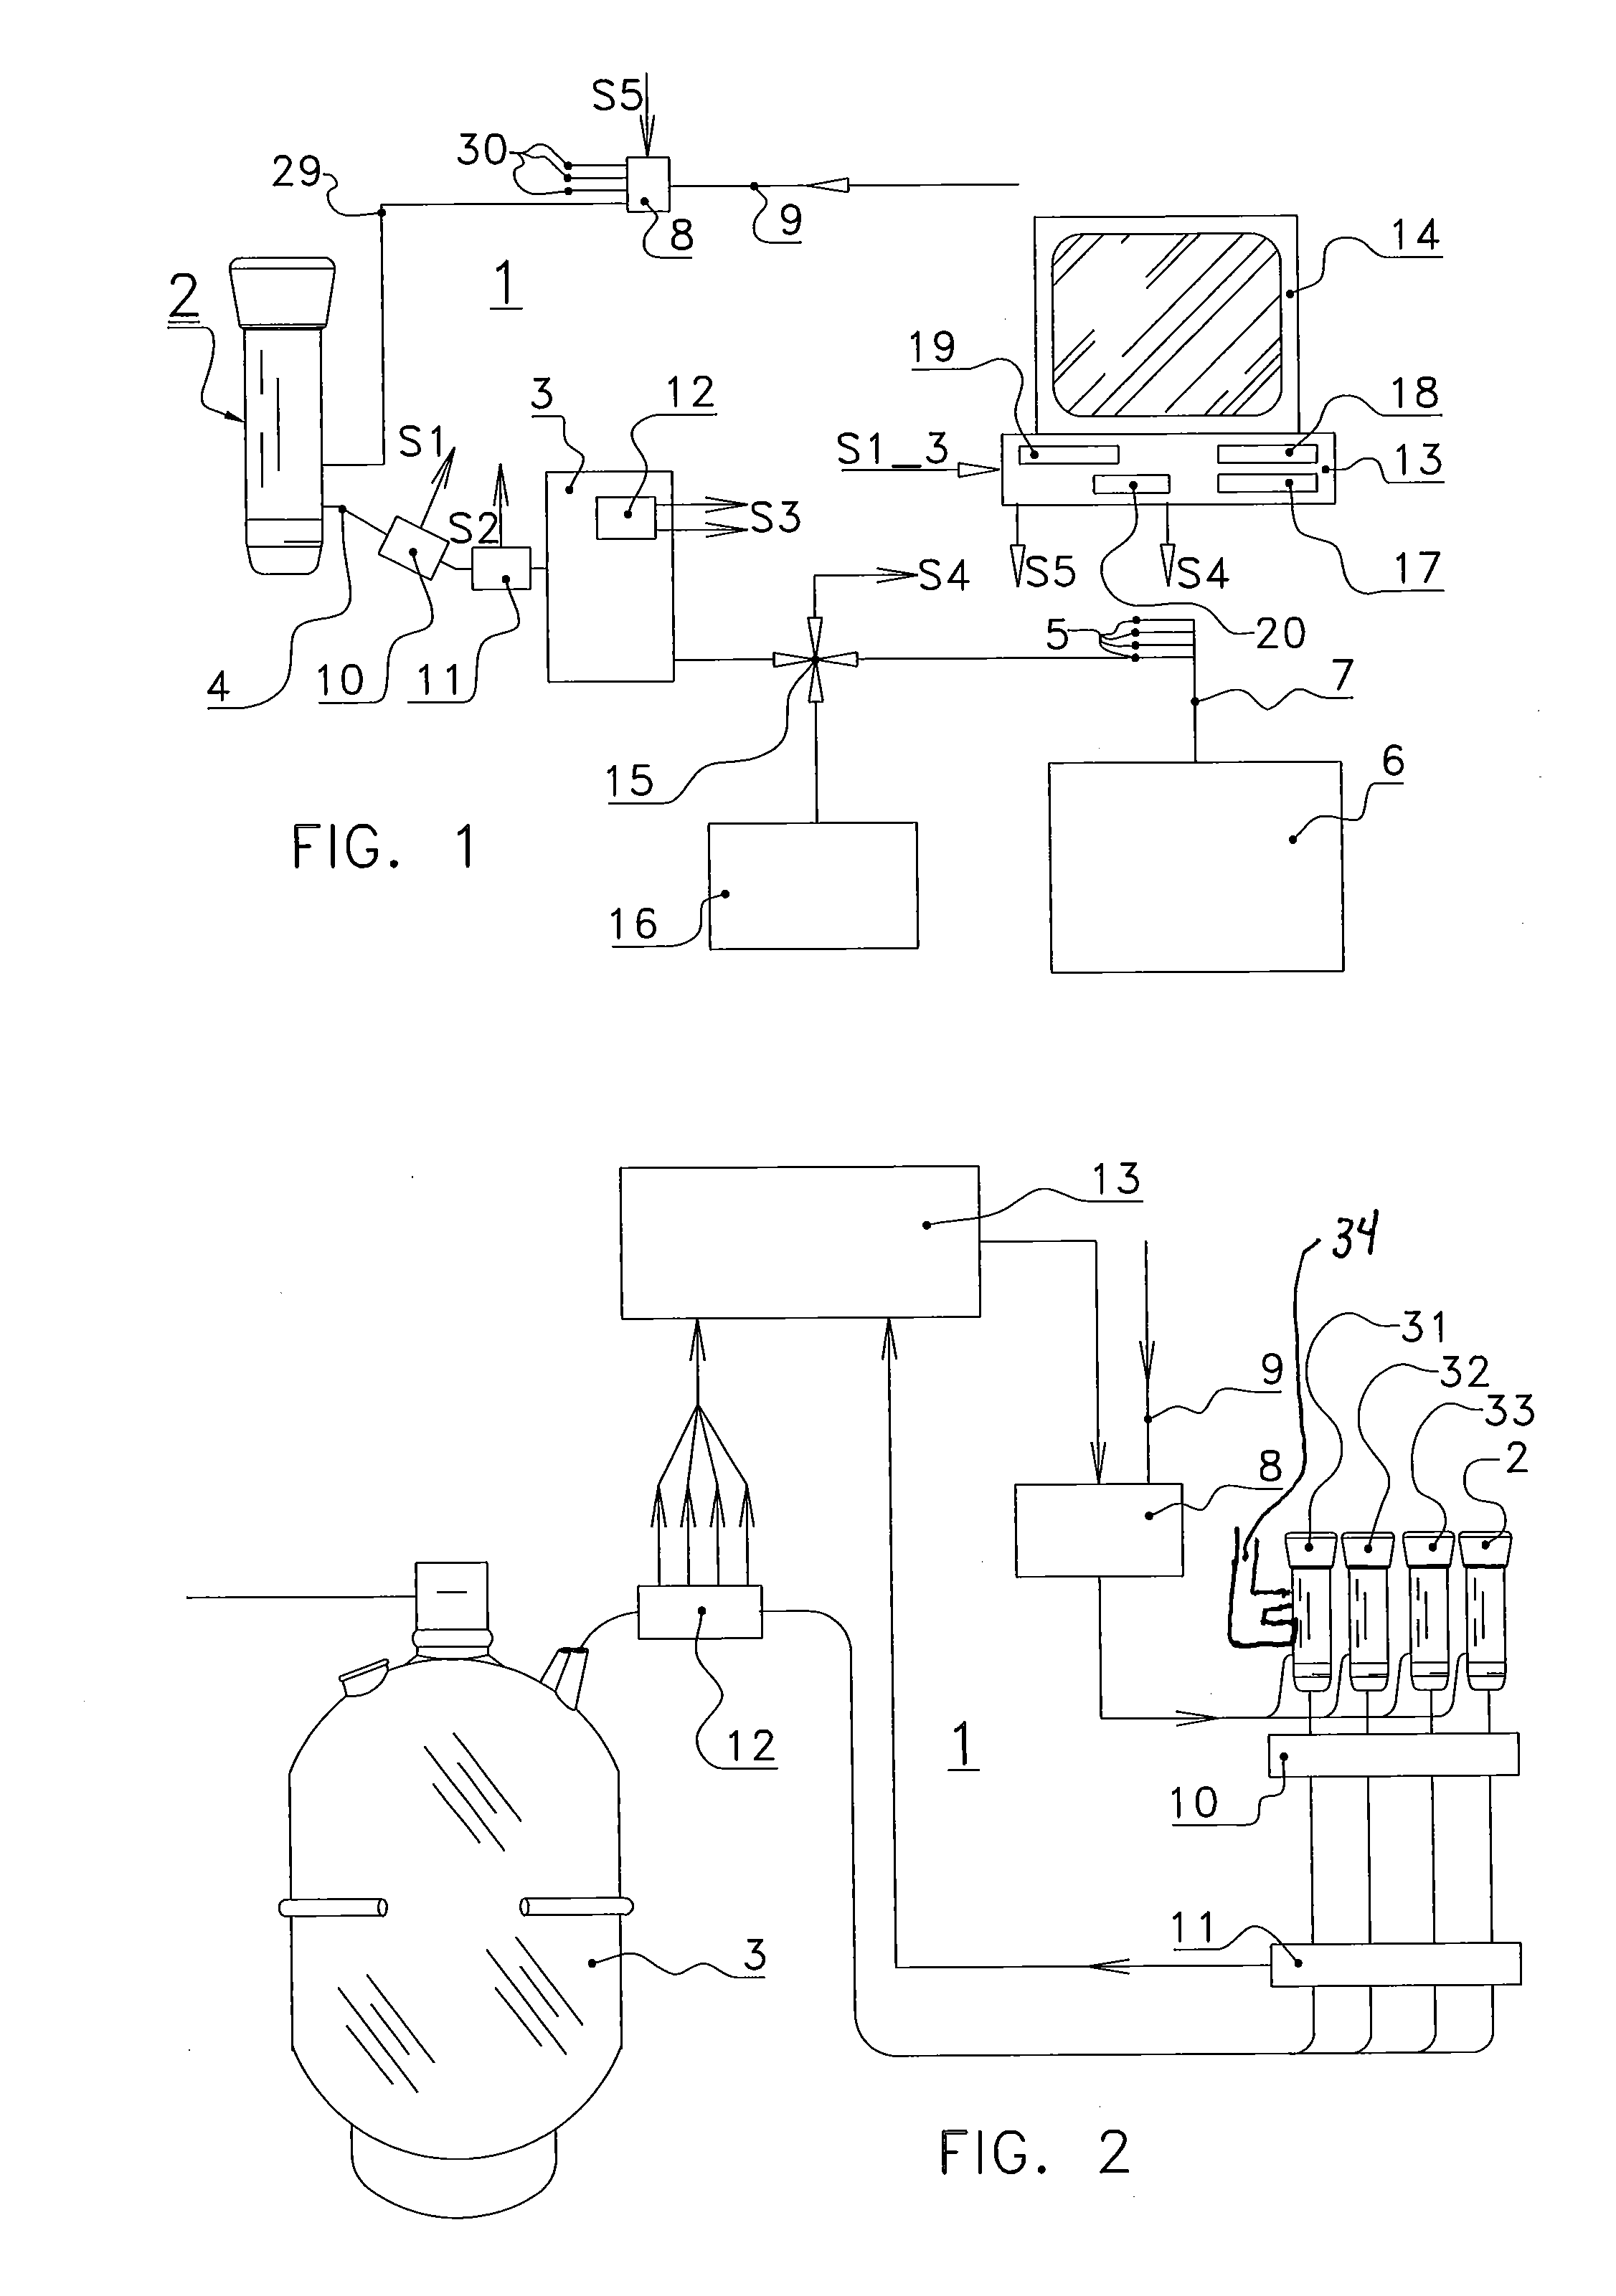 Method and device for milking a dairy animal